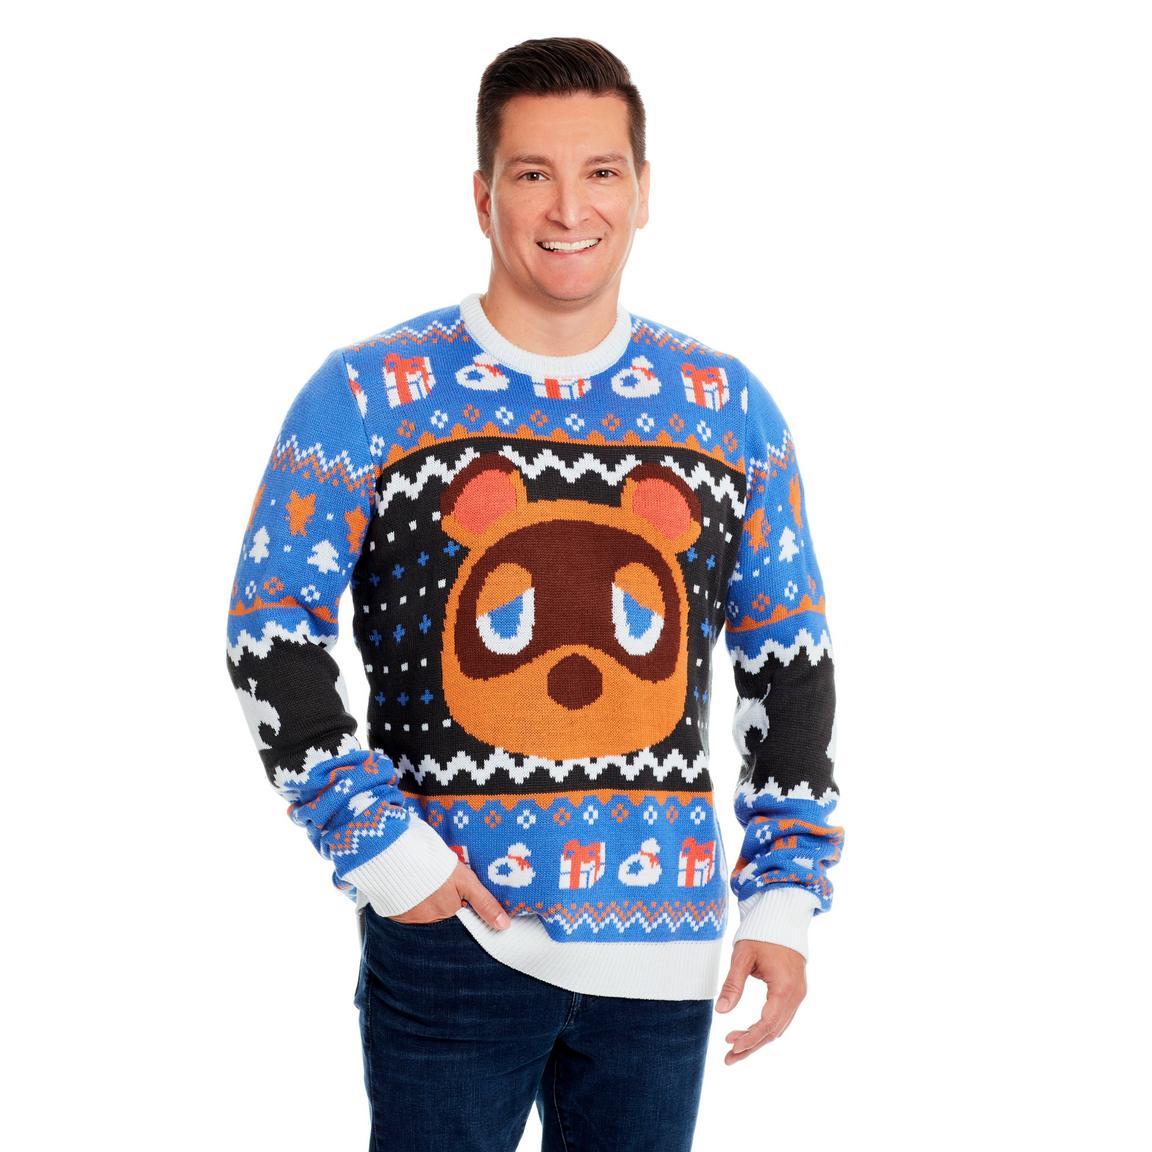 Animal Crossing Holiday Unisex Ugly Sweater for $20